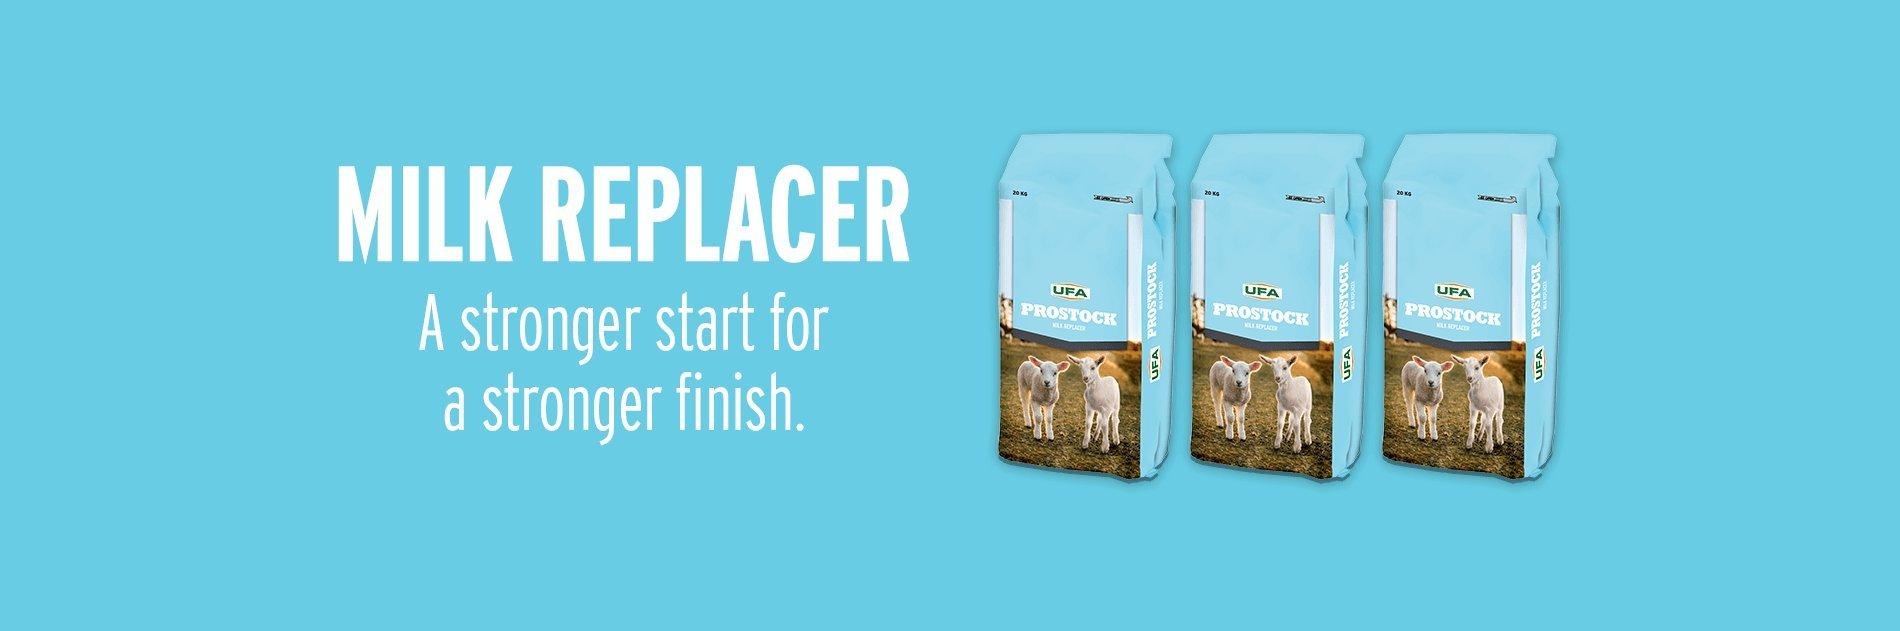 Milk Replacer - A Stronger Start for a Stronger Finish